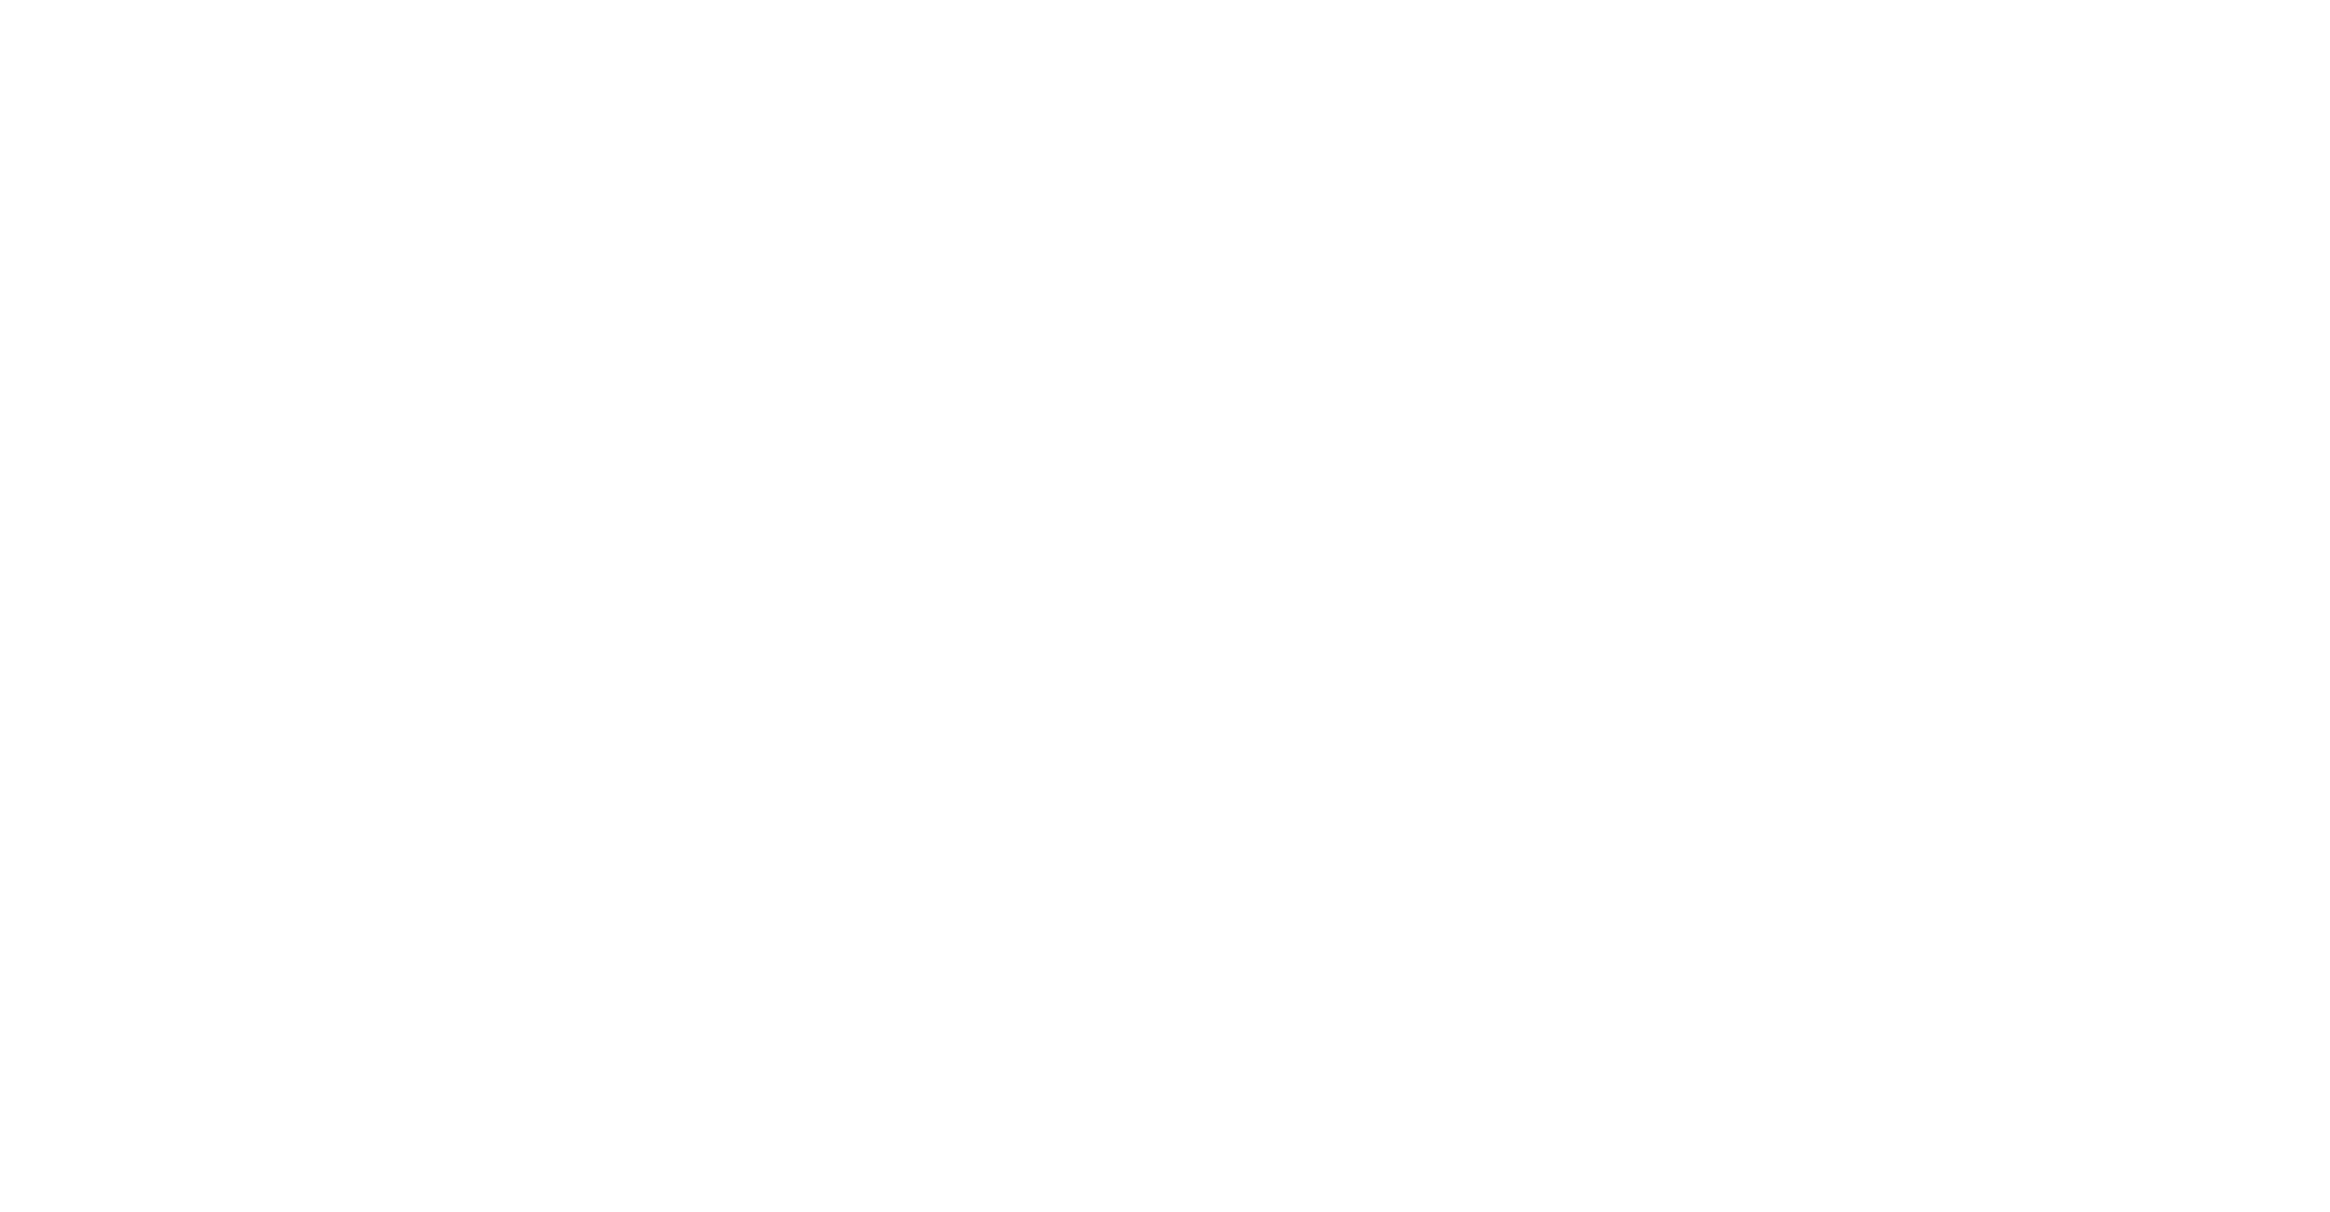 How risk and commitment influence each other and the limiting factors to break the cycle